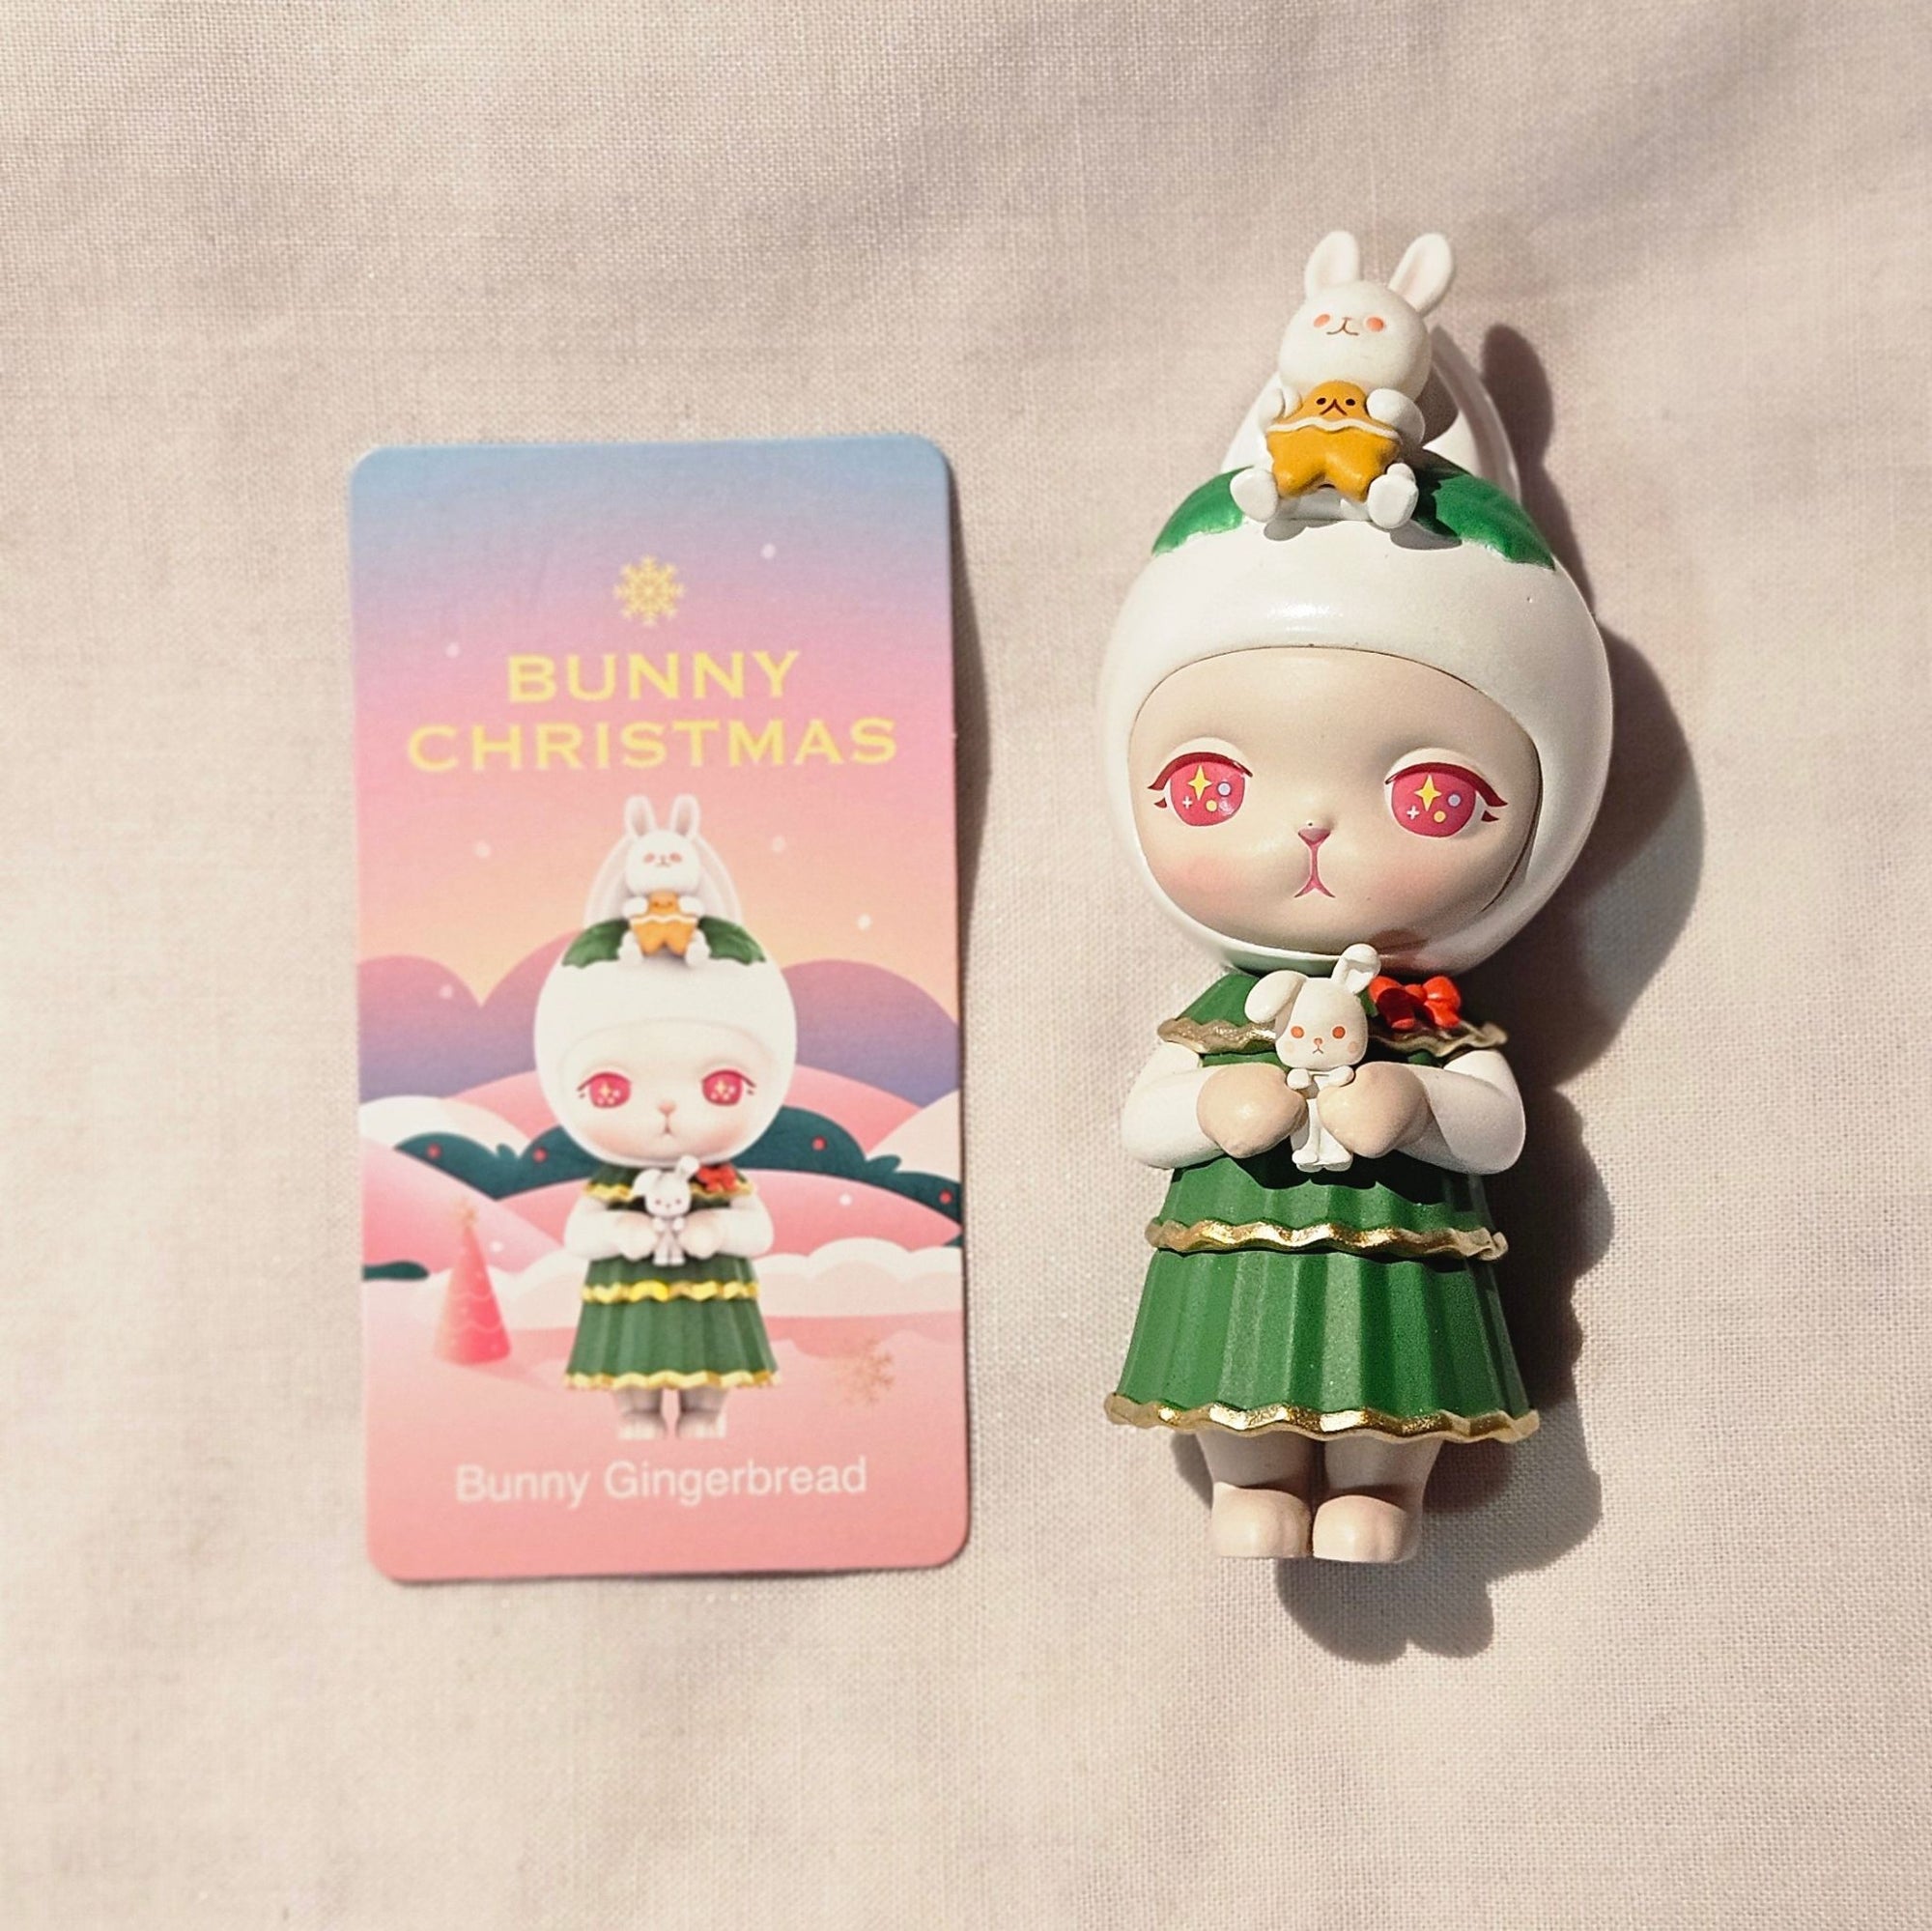 Bunny Gingerbread - Bunny Christmas Blind Box Series by POP MART - 1